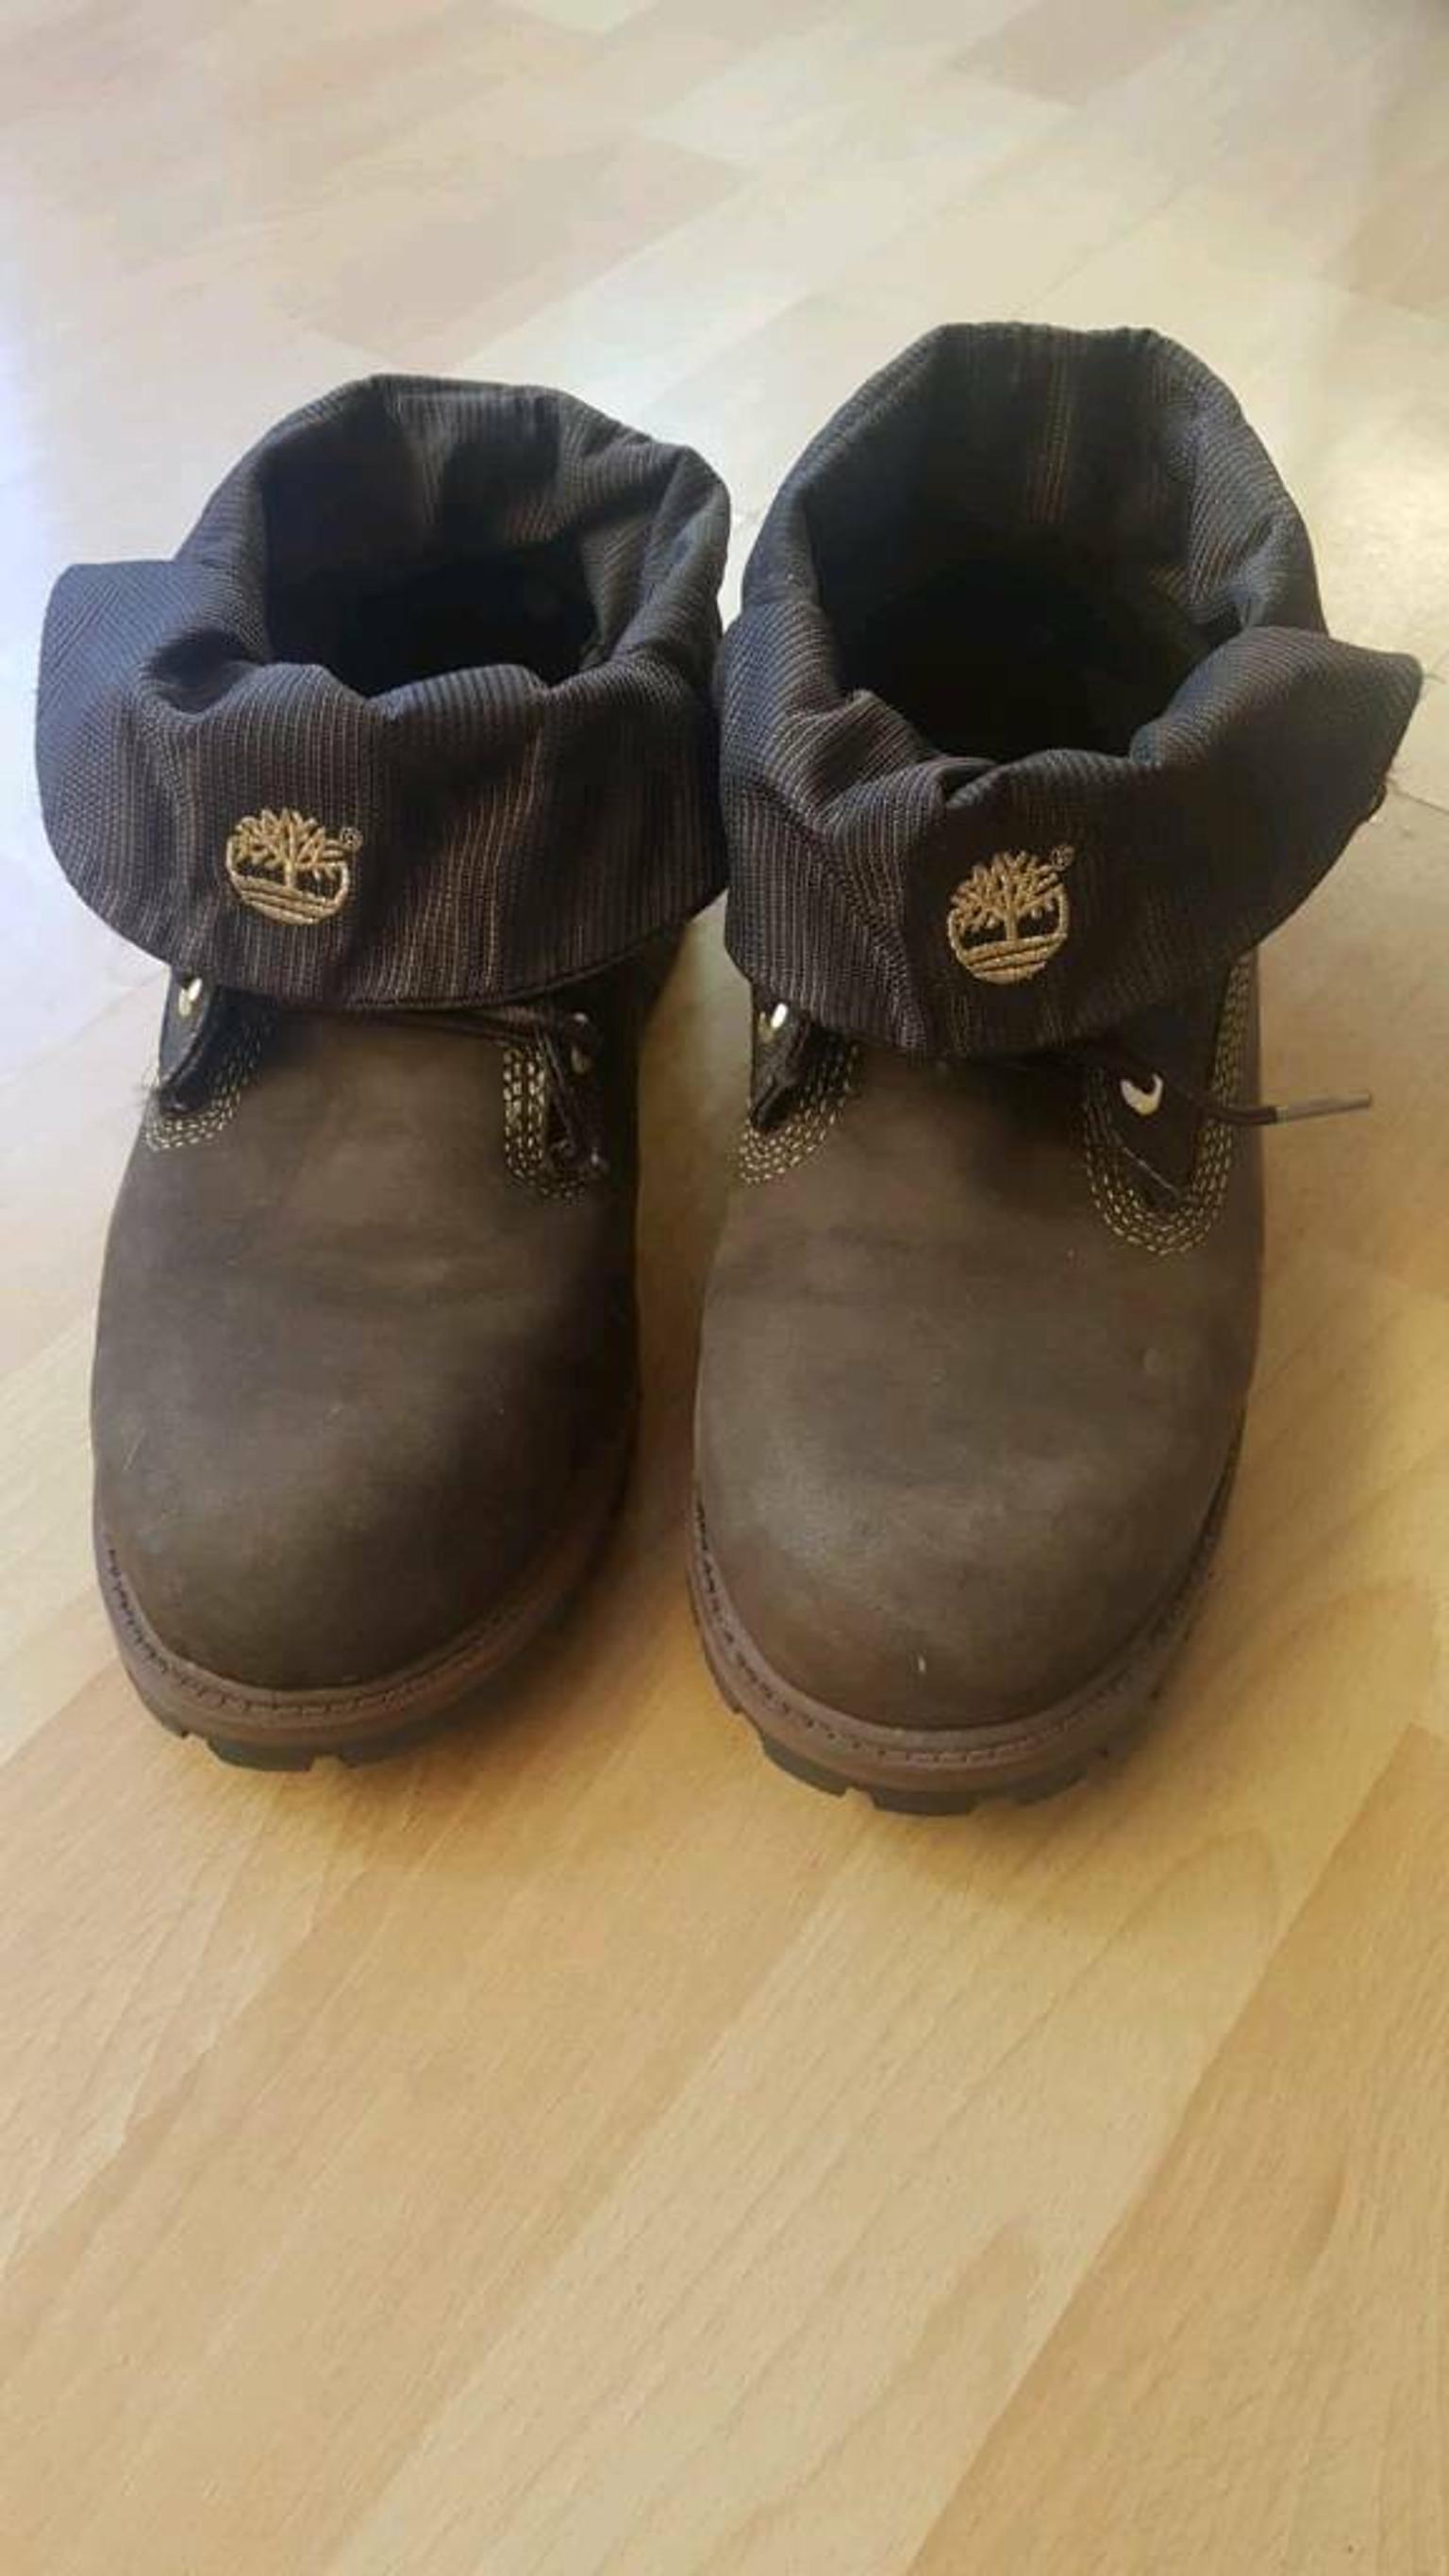 Despertar Temporizador Suavemente Timberland Lace Up Leather Womens Boots in RM10 Dagenham for ...